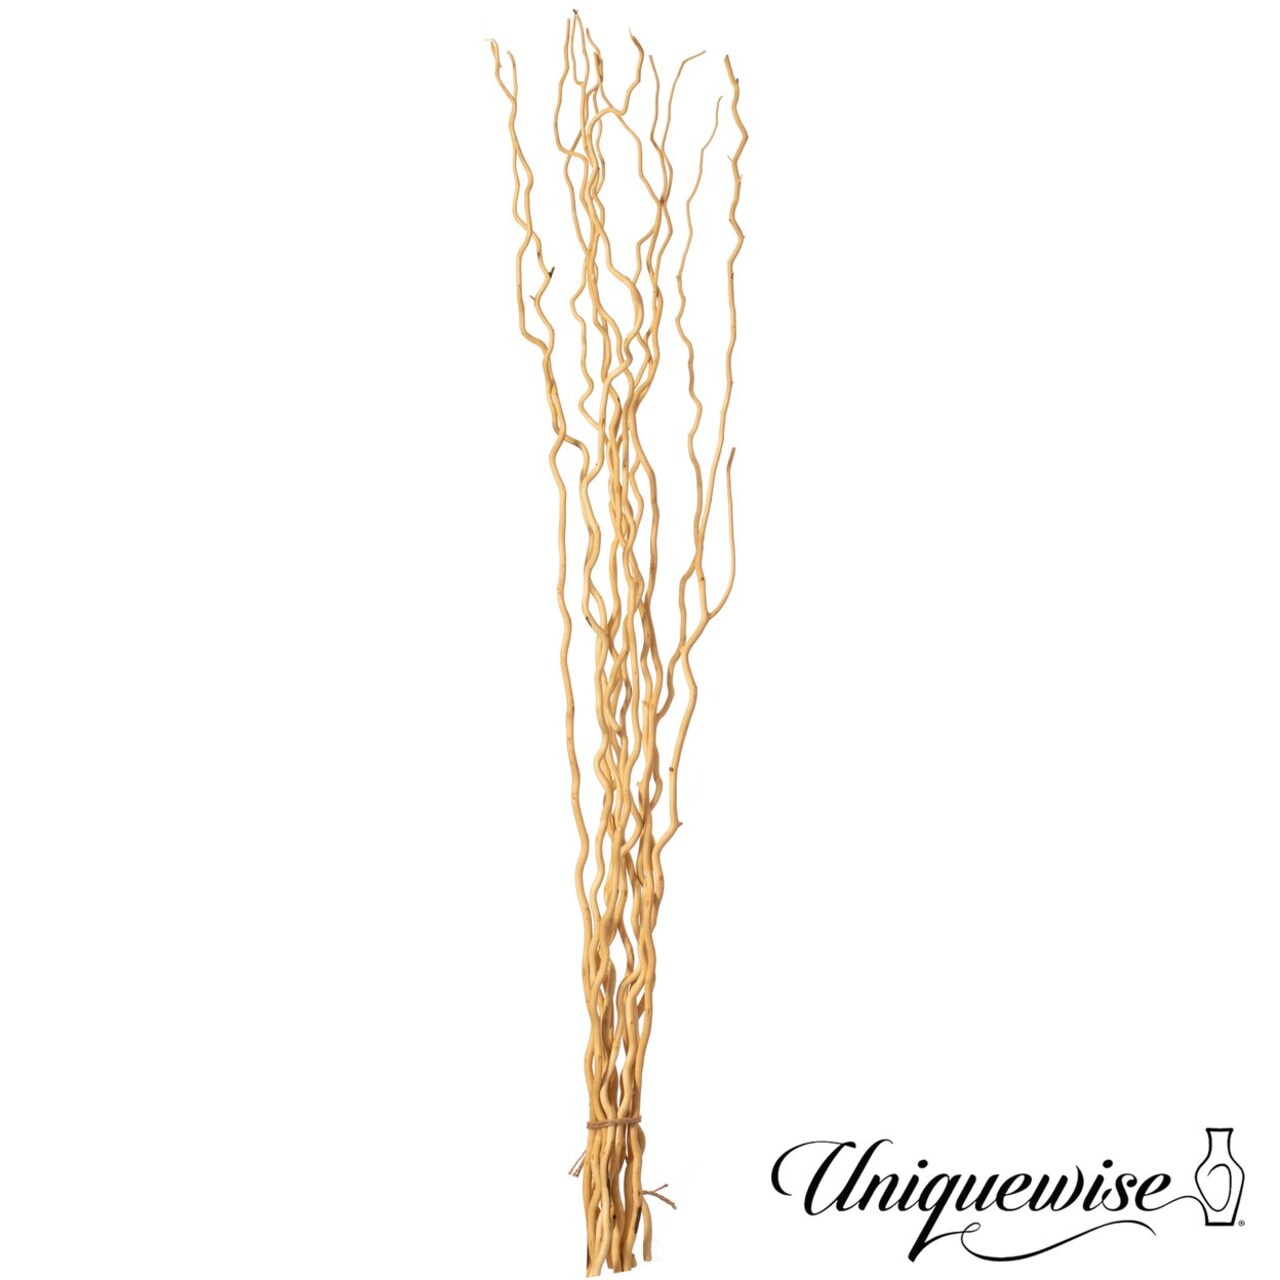 Uniquewise Natural Decorative Dry Branches Authentic Willow Sticks